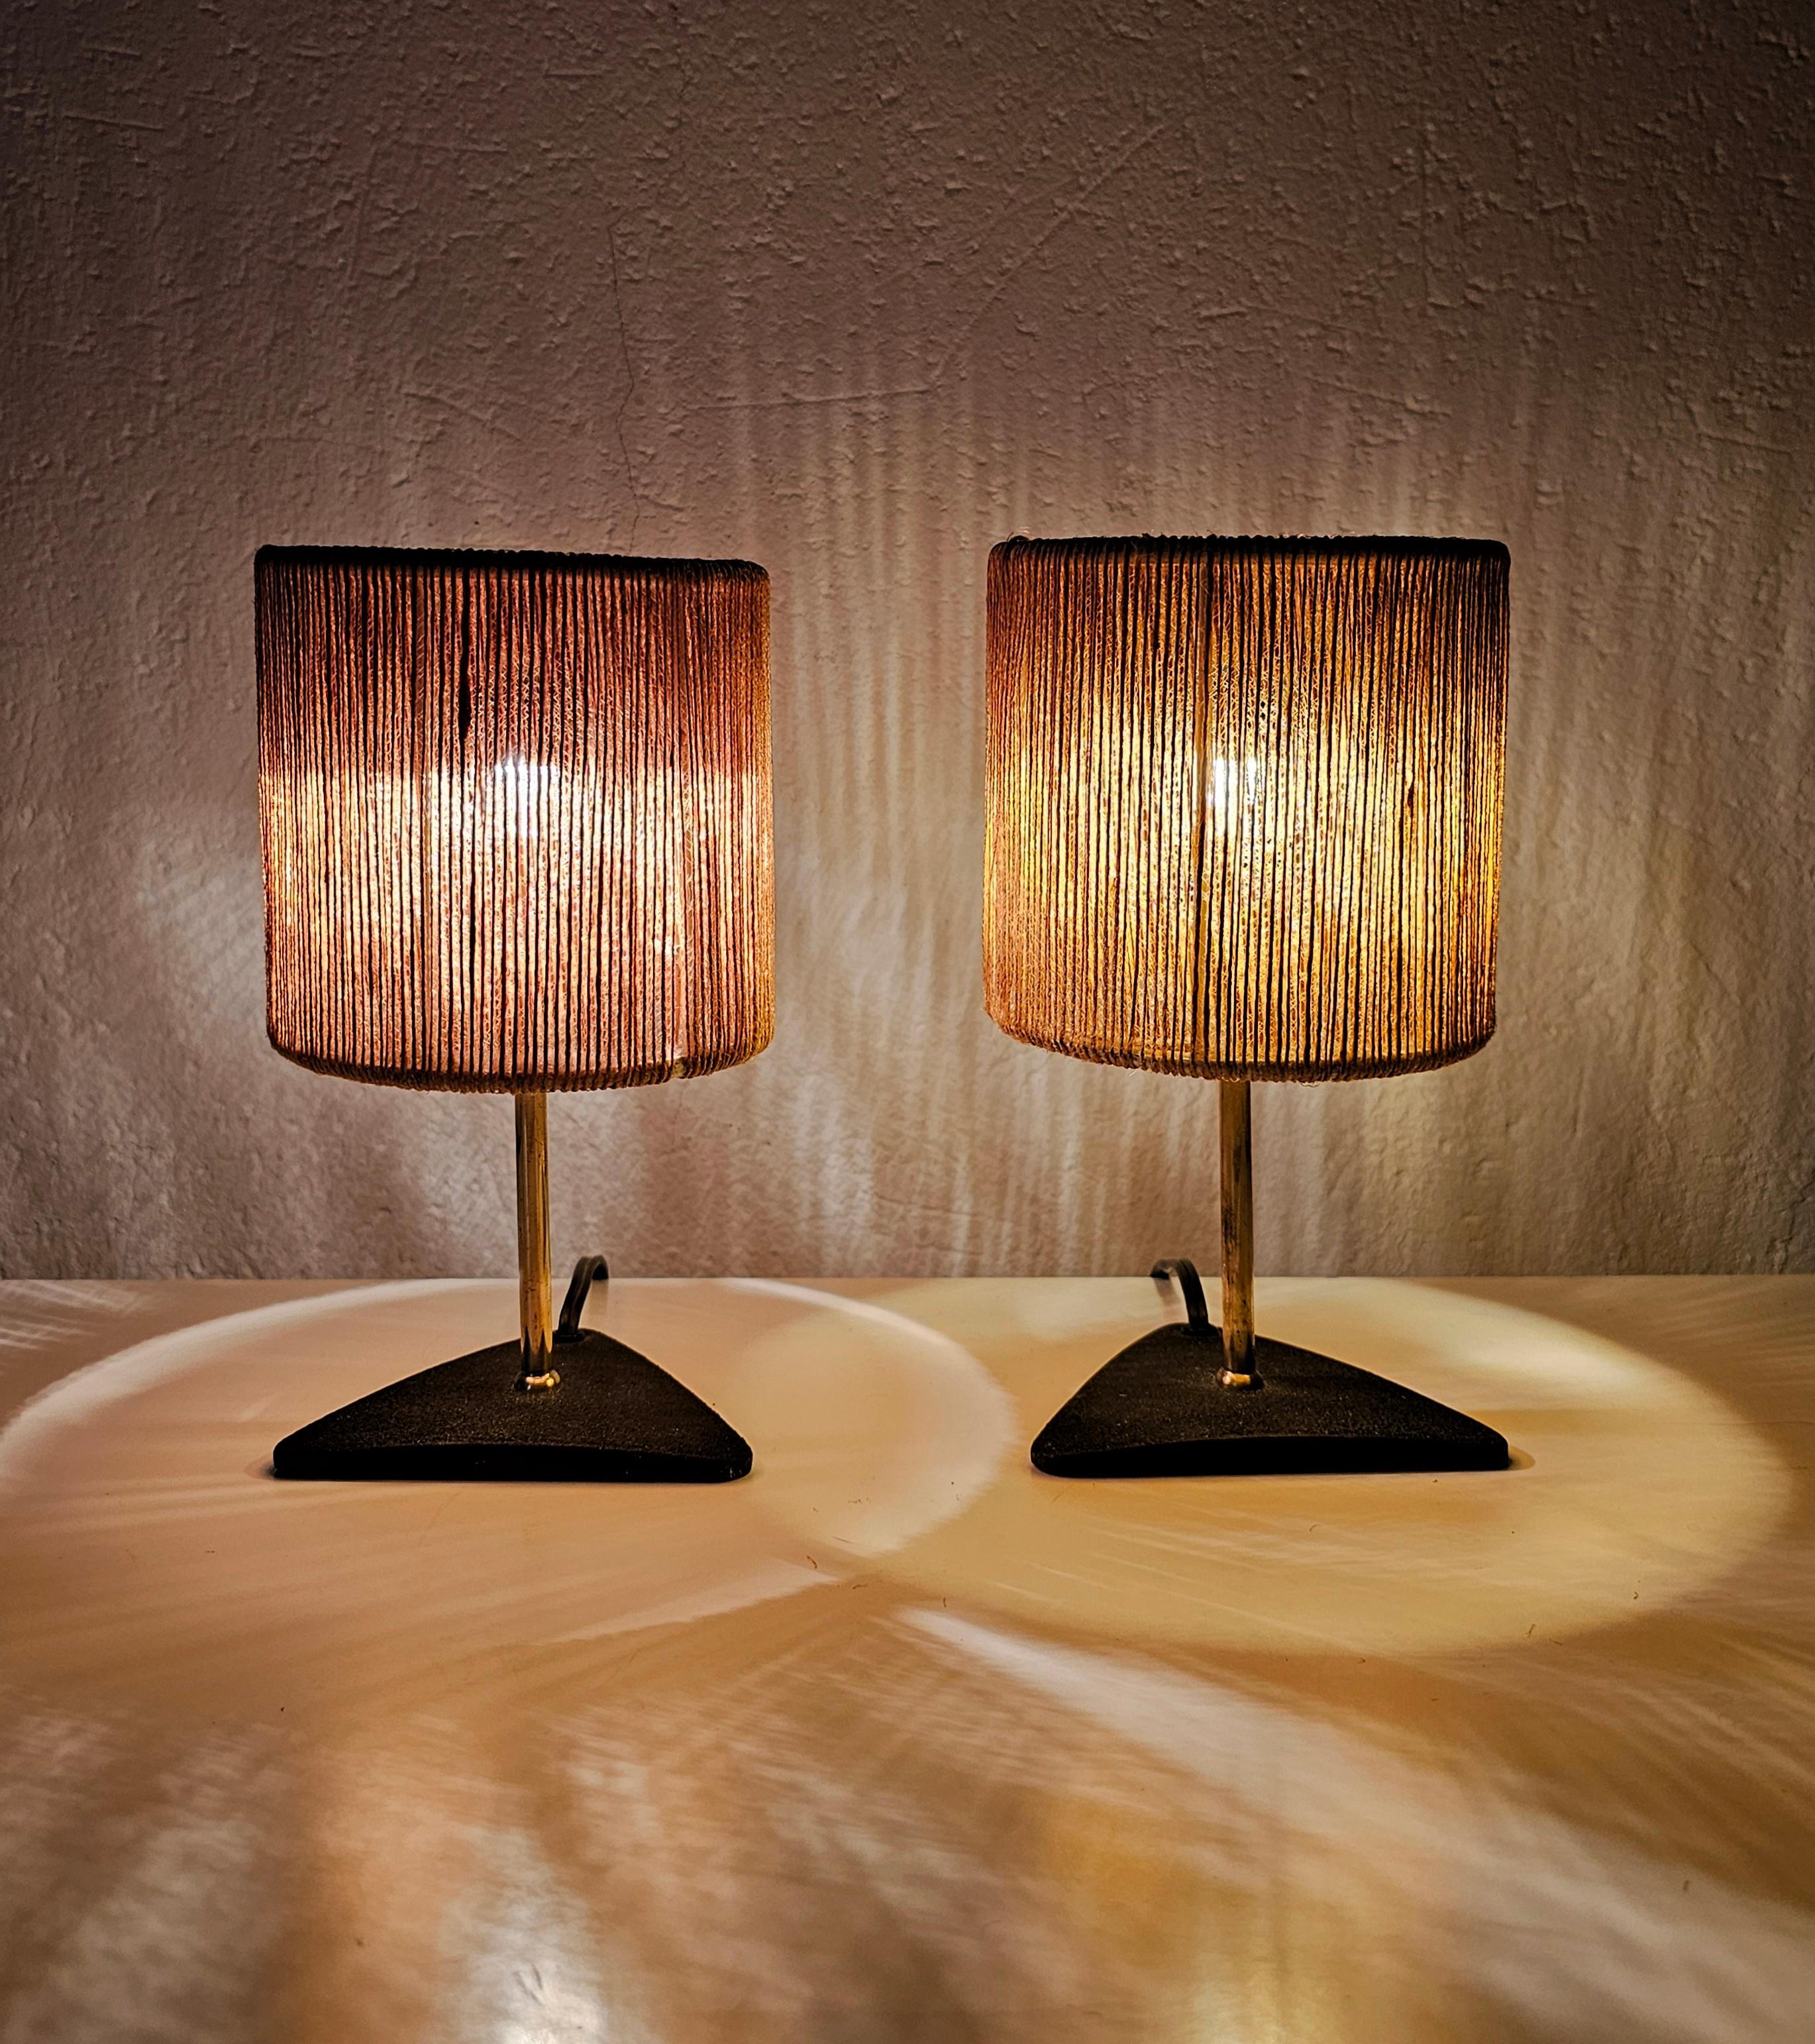 In this listing you will find a pair of spectacular Mid Century Modern table lamps done in style of Carl Aubock. They feature beautiful triangular wrought iron base and the small woven shades in natural thread. Made in Austria in late 1940s.

The